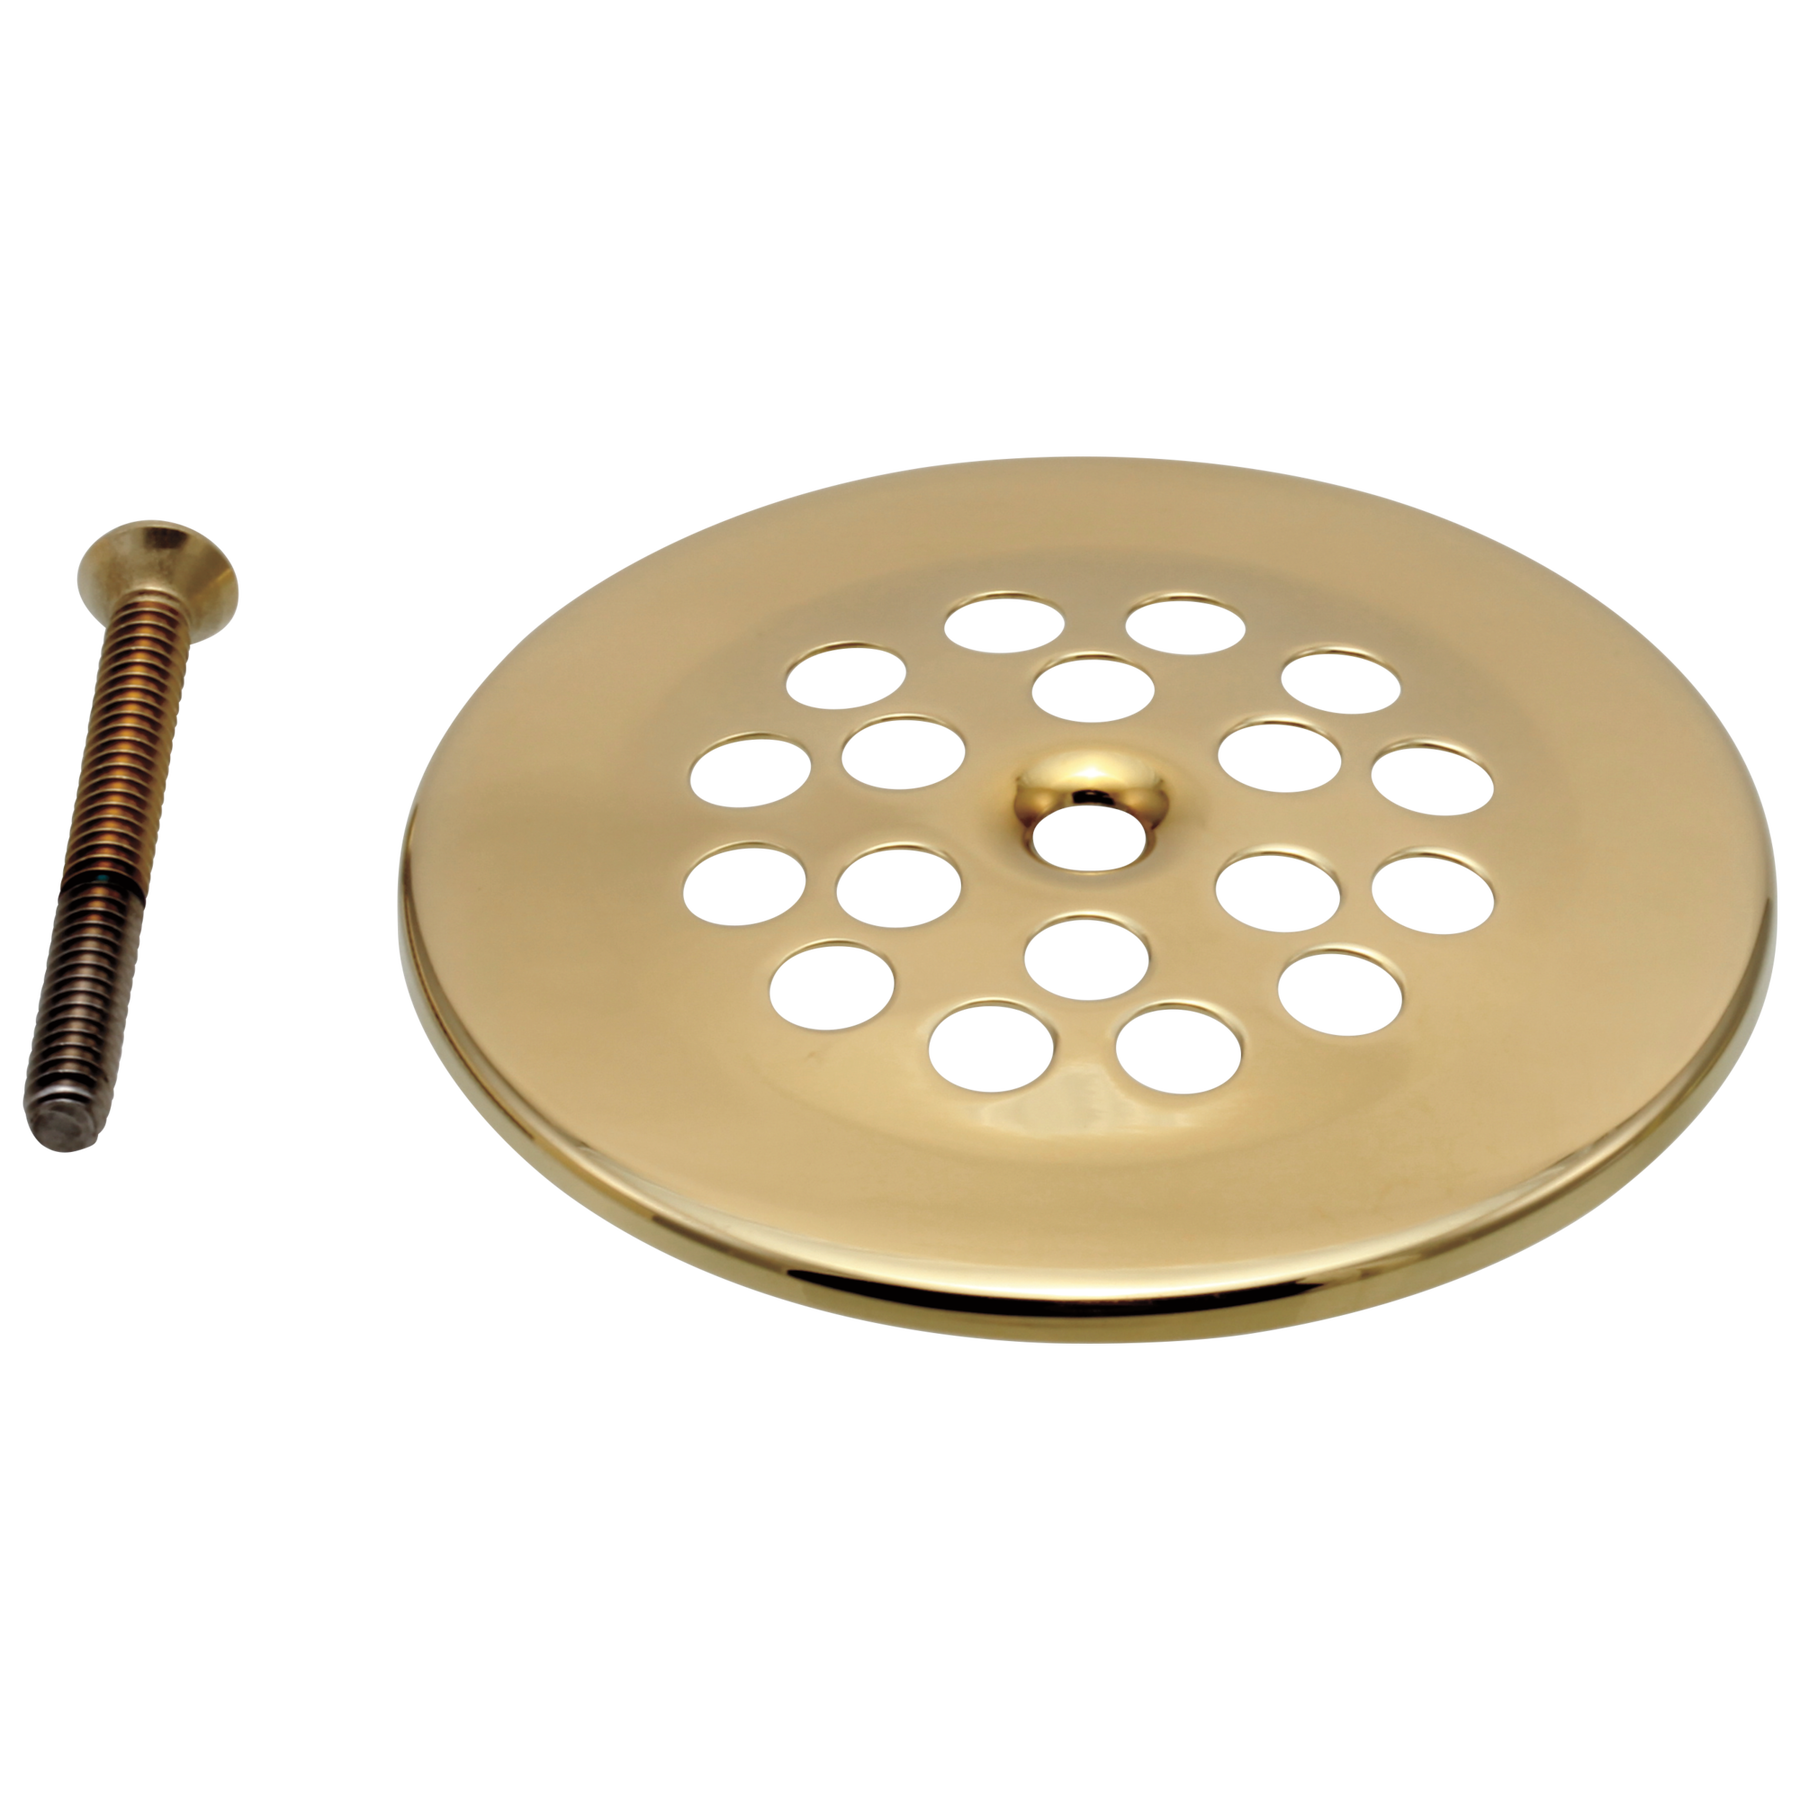 Do it 2 In. Dome Cover Tub Drain Strainer with Brushed Nickel